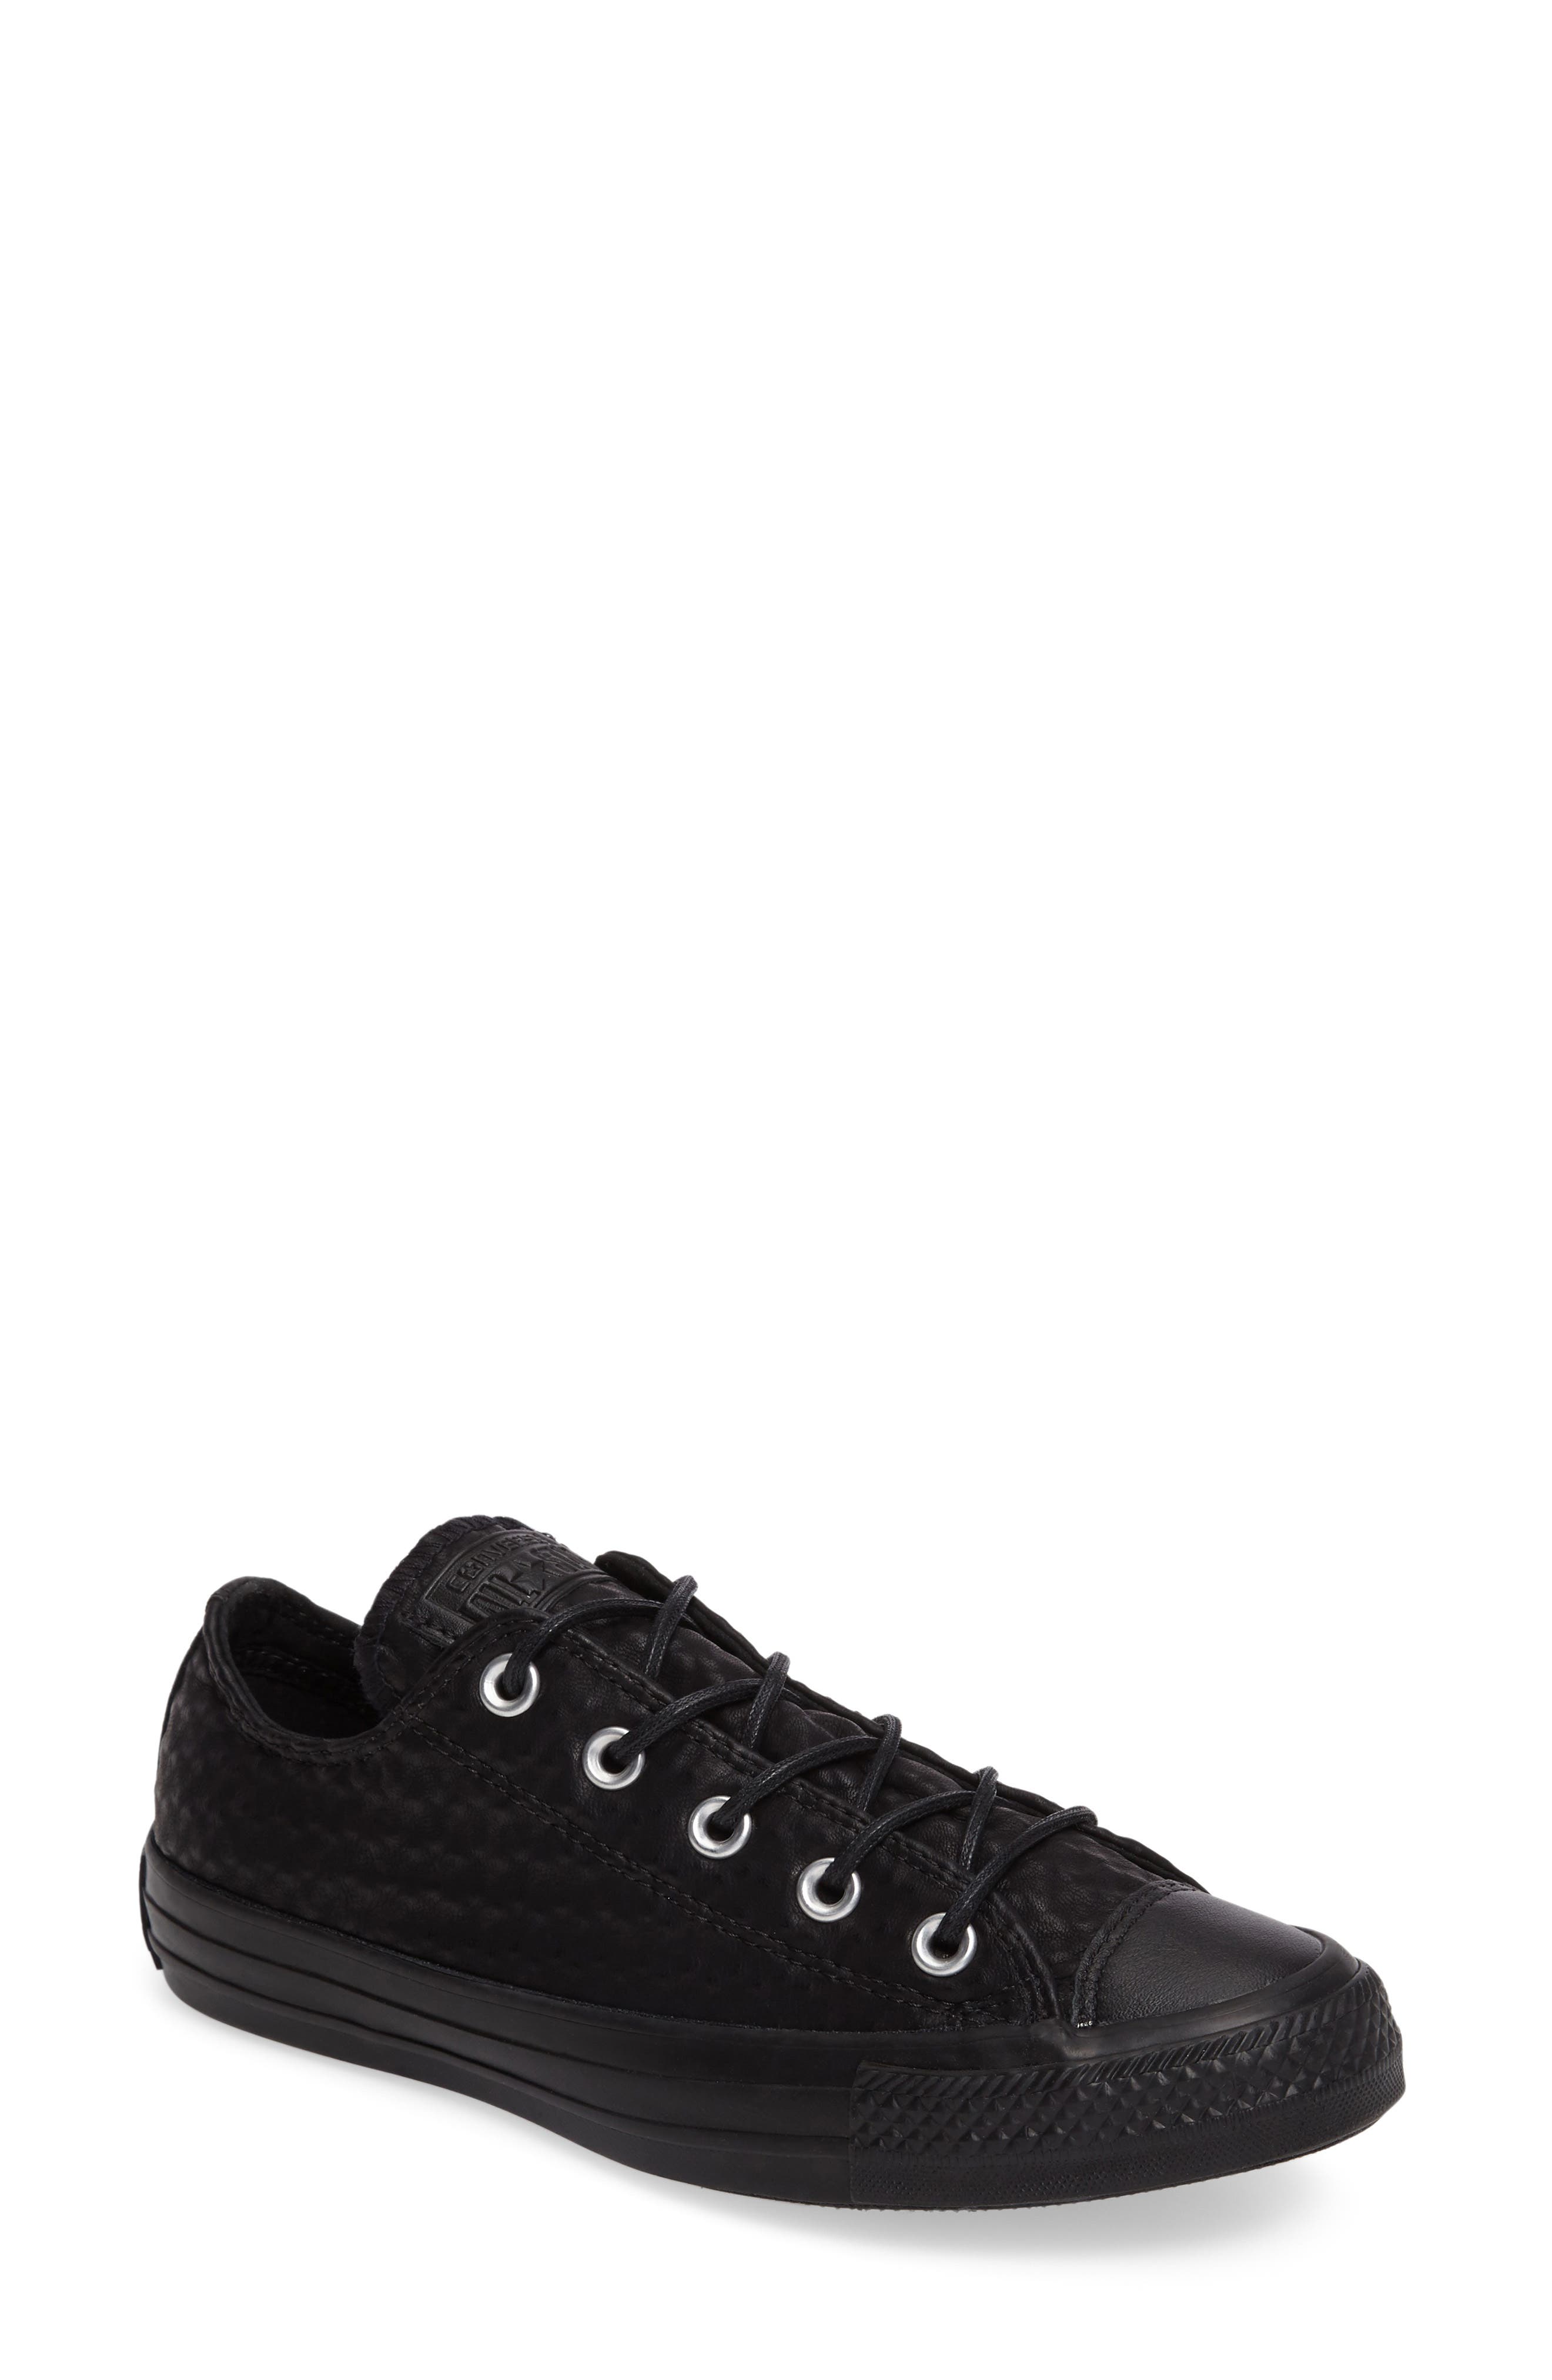 converse chuck taylor ox trainers in triple black leather